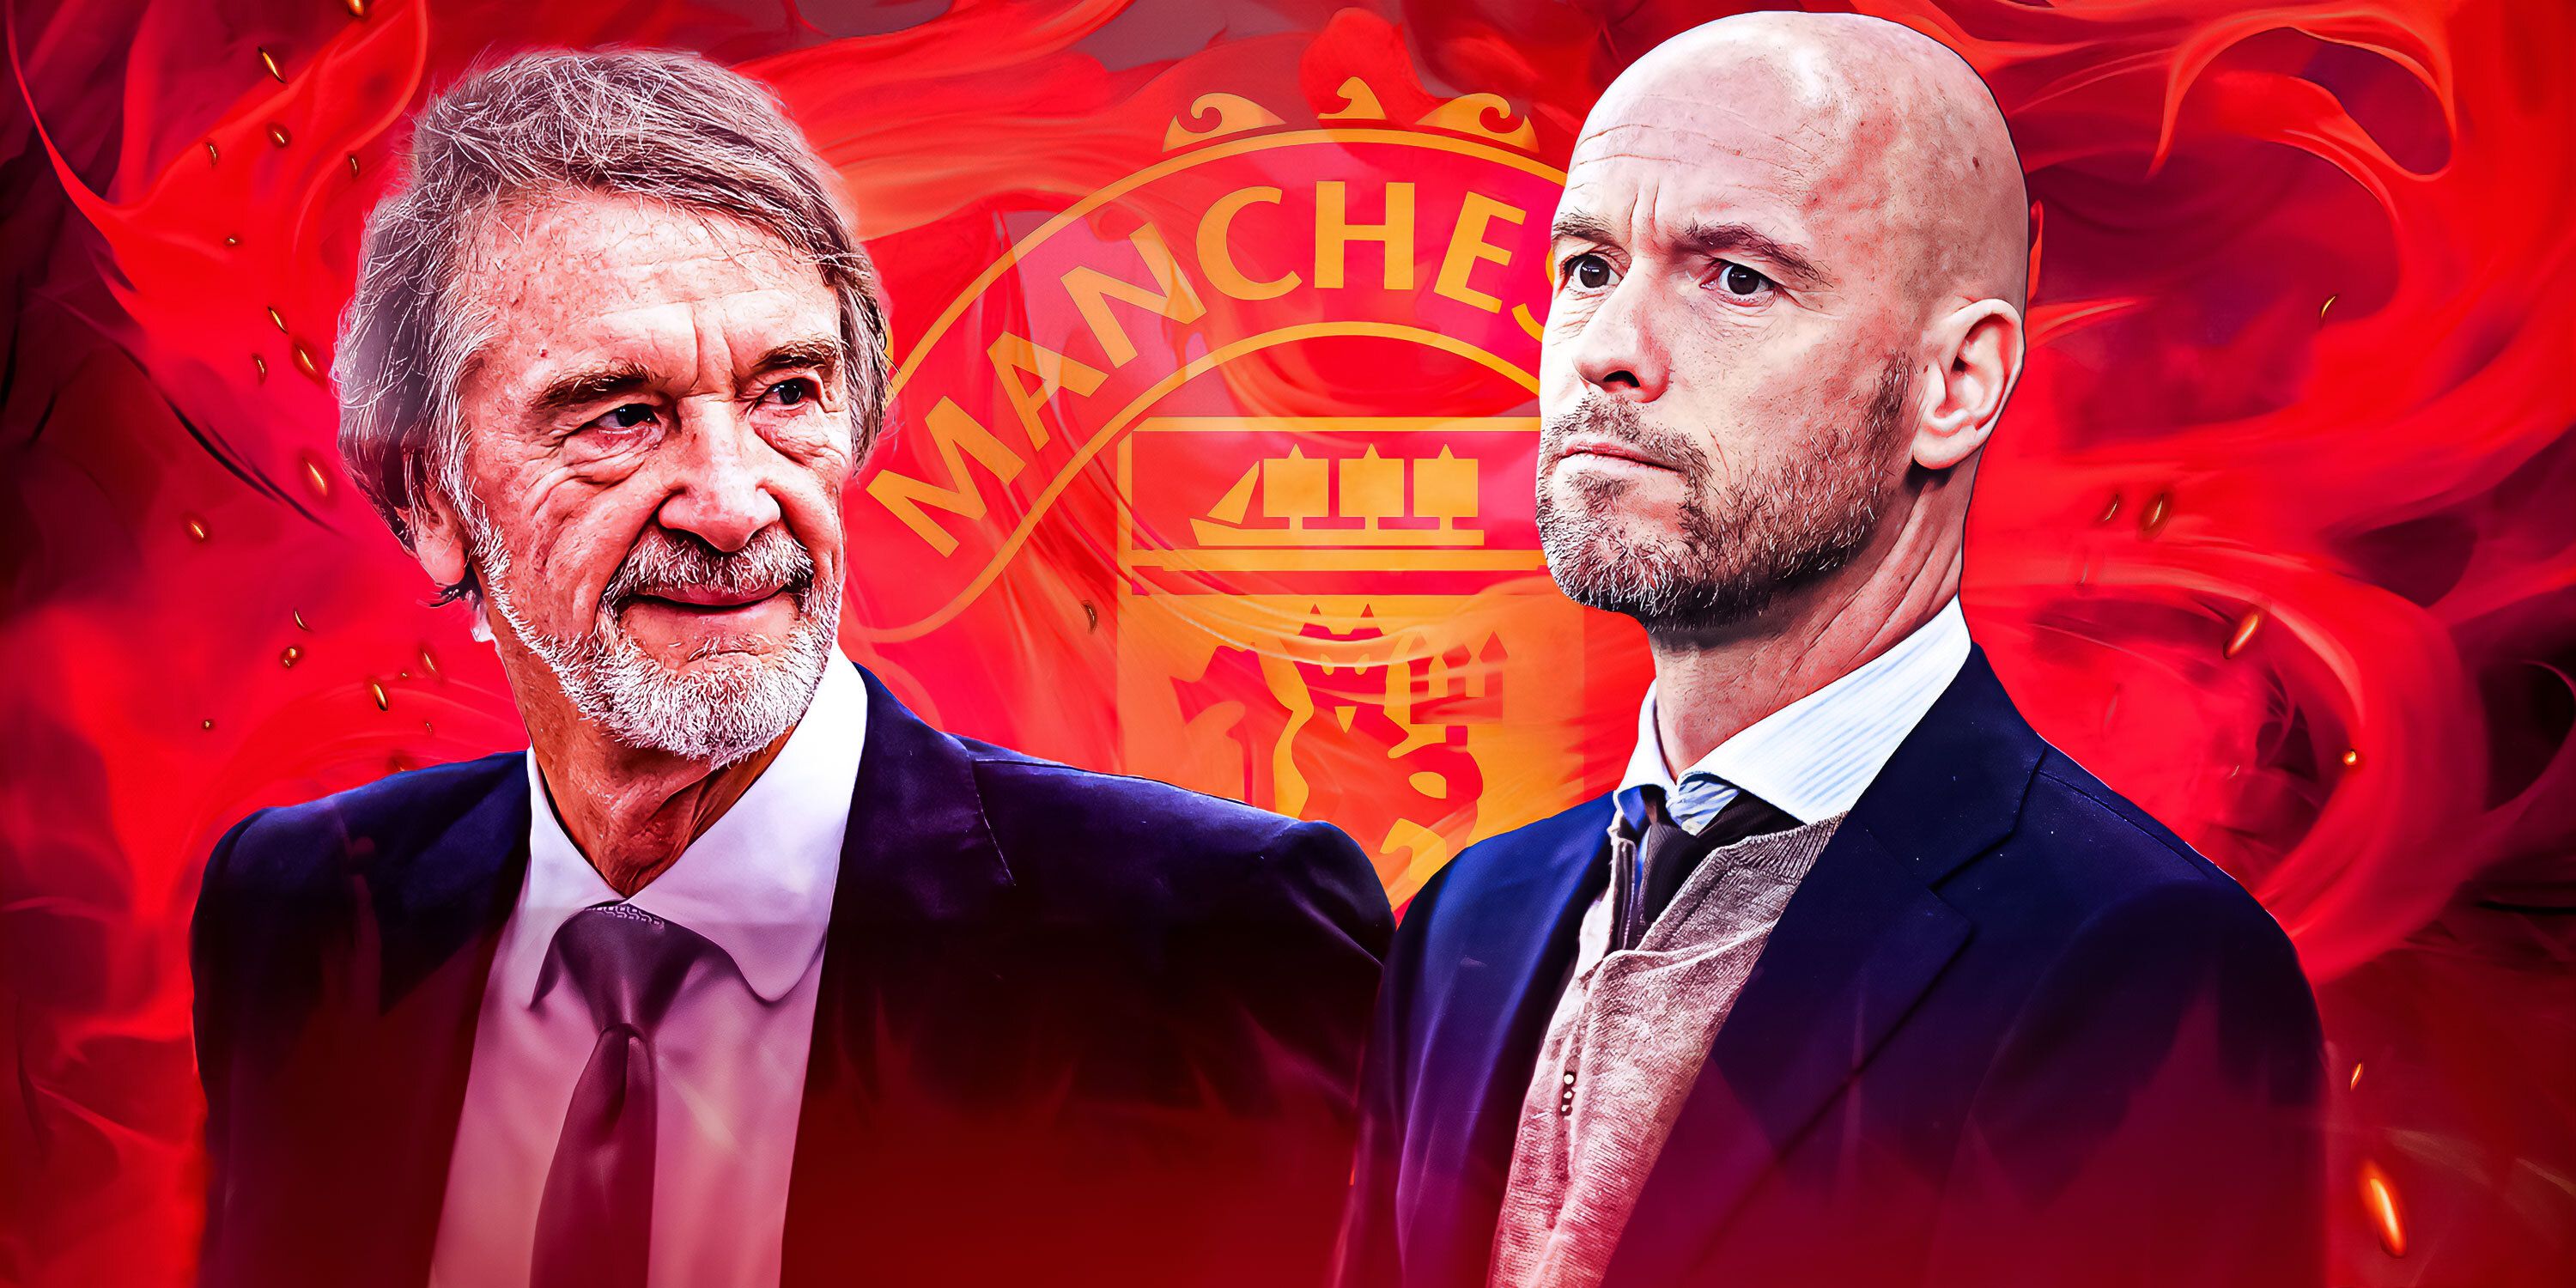 Manchester United co-owner Sir Jim Ratcliffe and boss Erik ten Hag